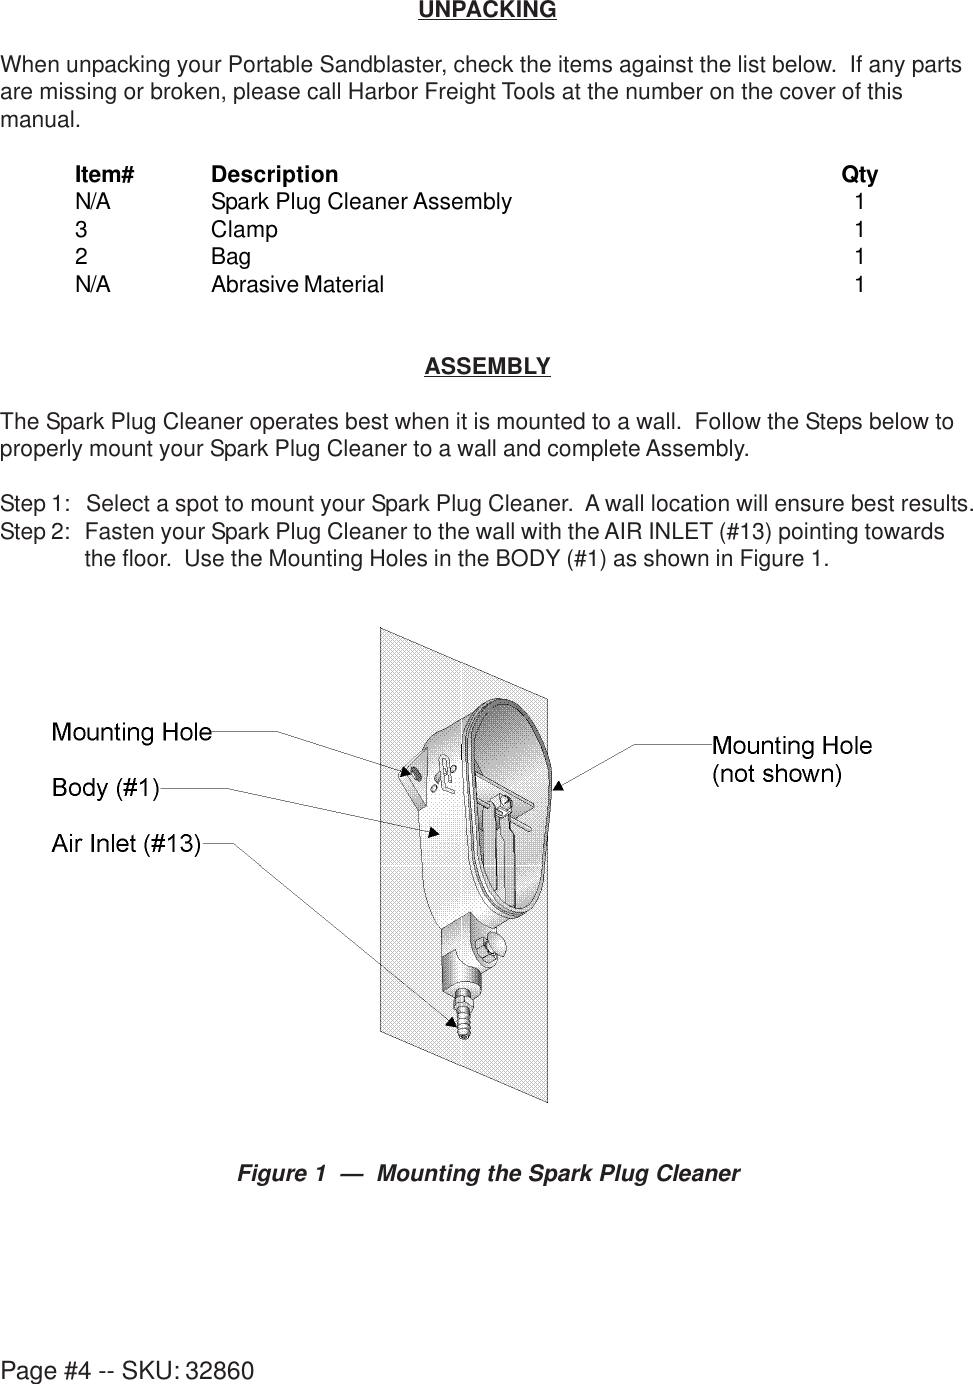 Page 4 of 10 - Harbor-Freight Harbor-Freight-Air-Spark-Plug-Cleaner-Product-Manual- 32860 Manual April 04  Harbor-freight-air-spark-plug-cleaner-product-manual